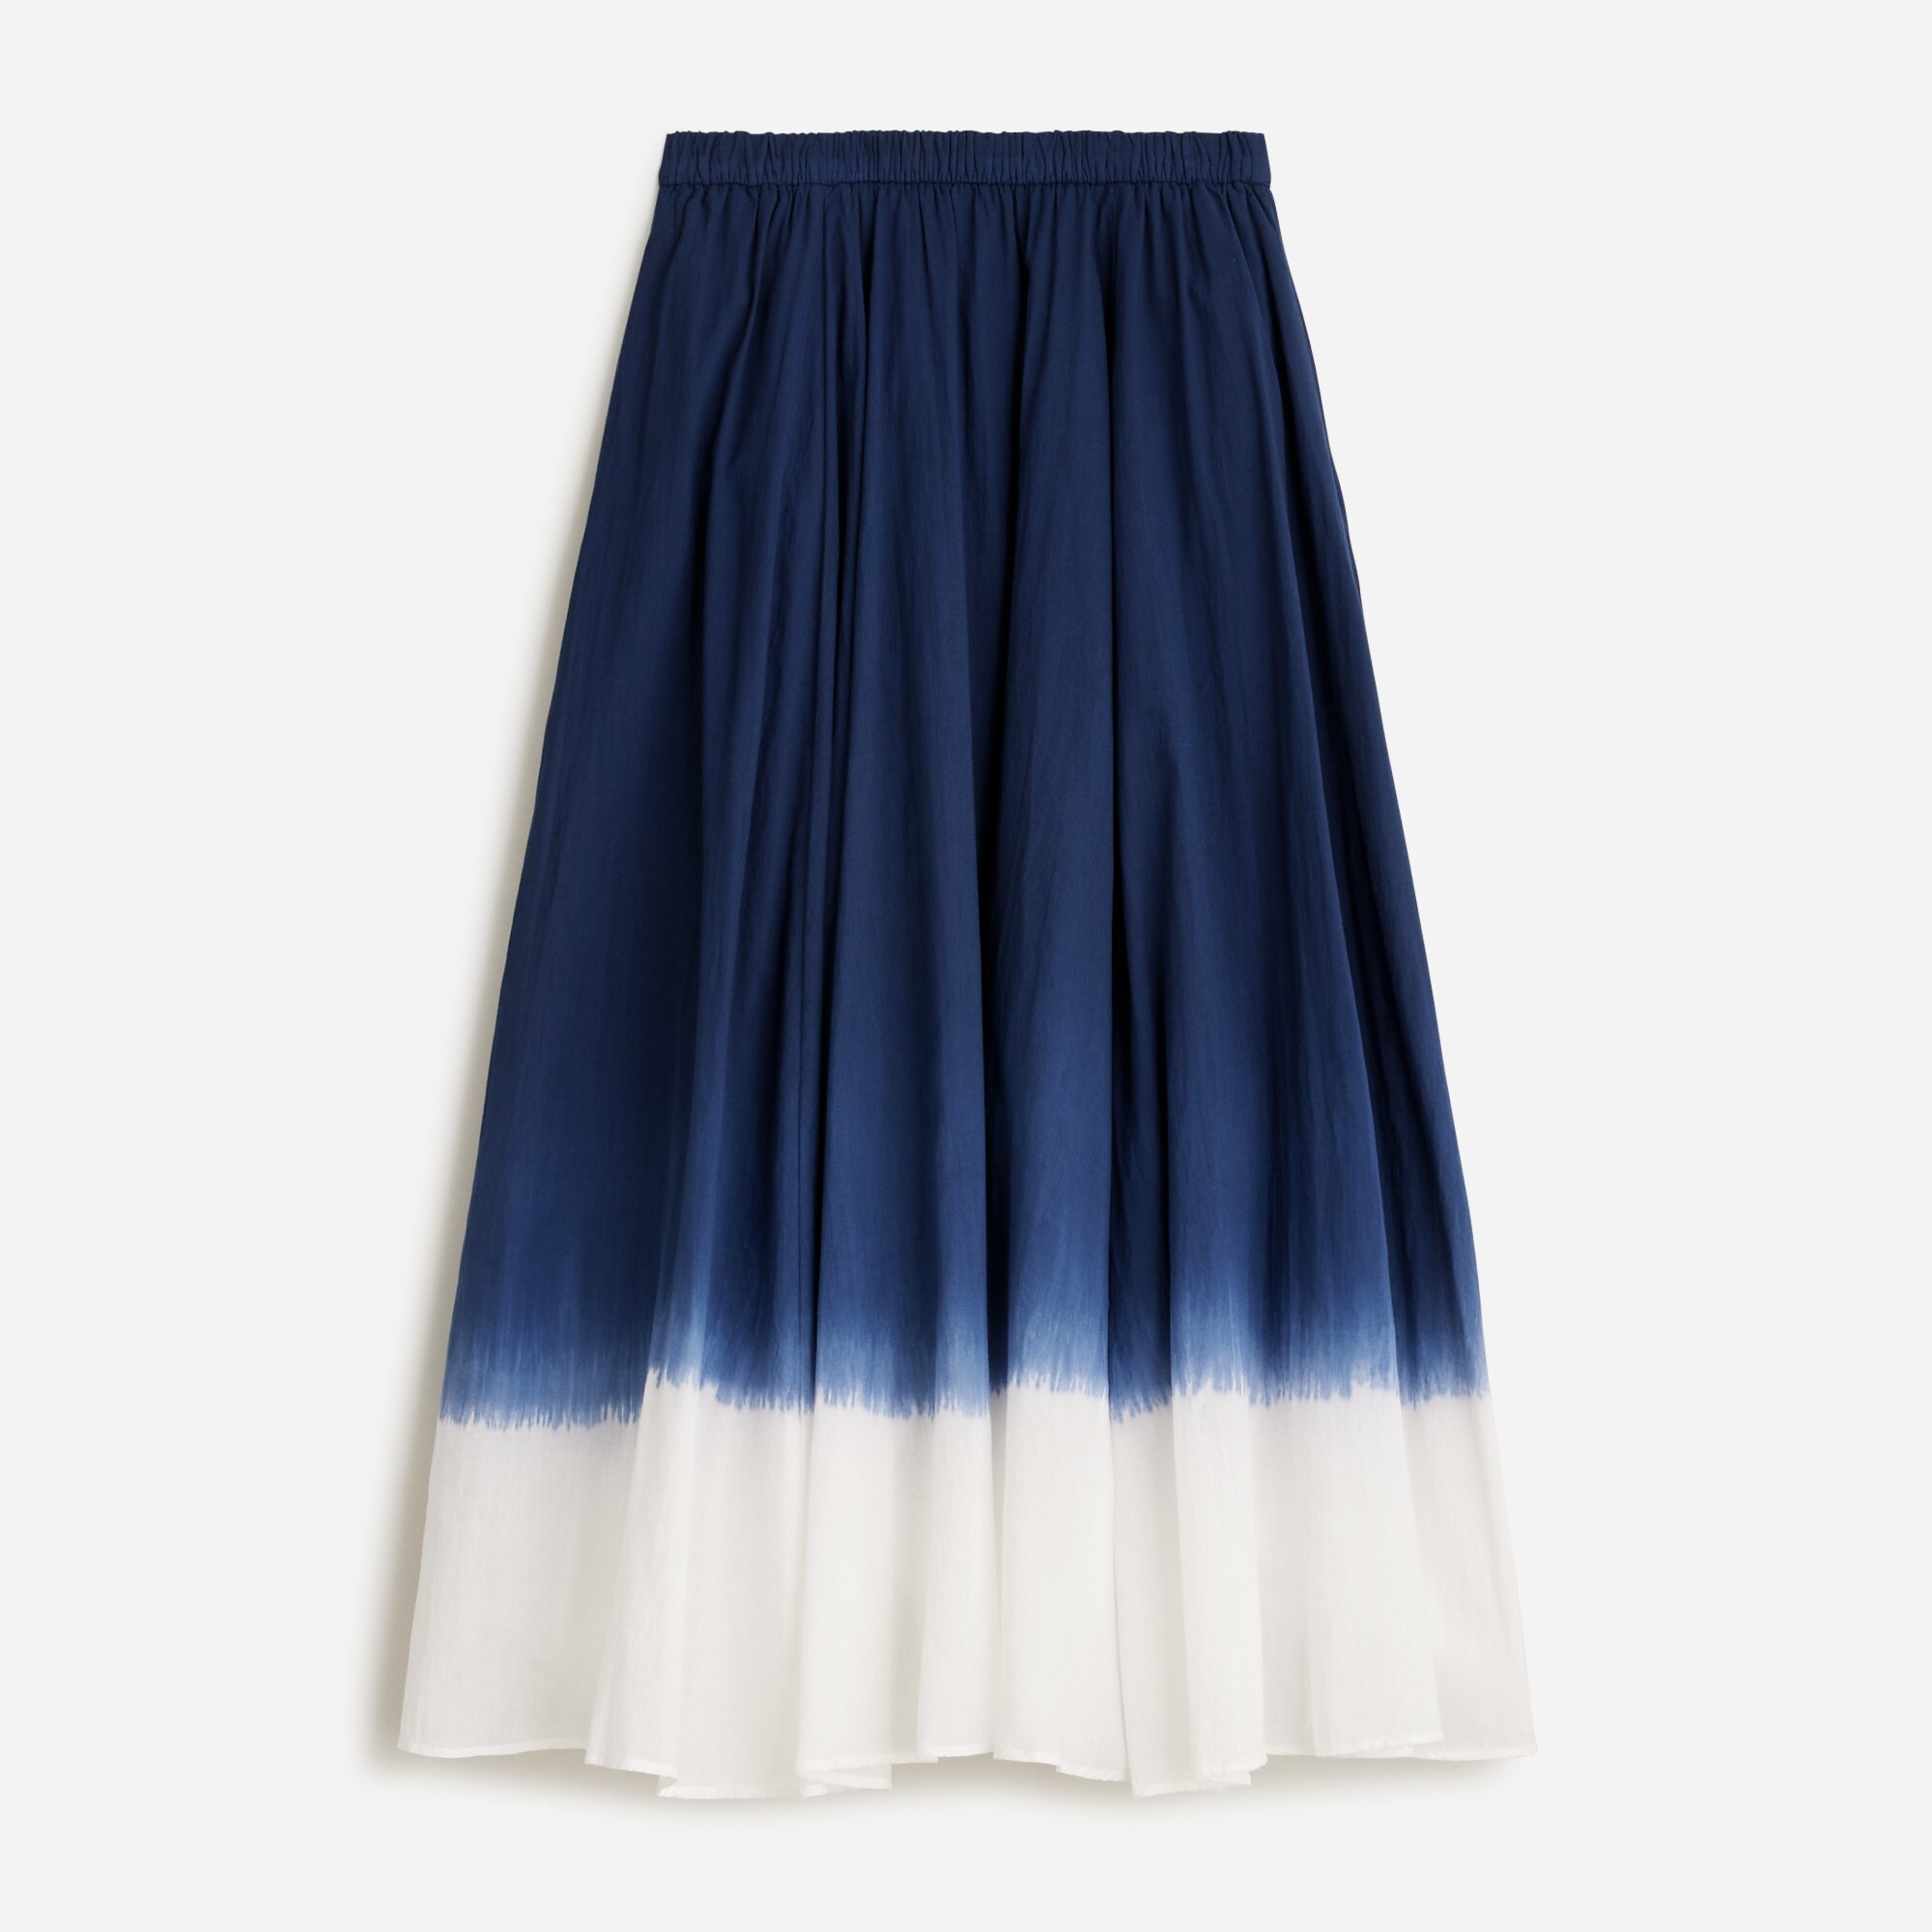  Pull-on midi skirt in dip-dyed cotton voile